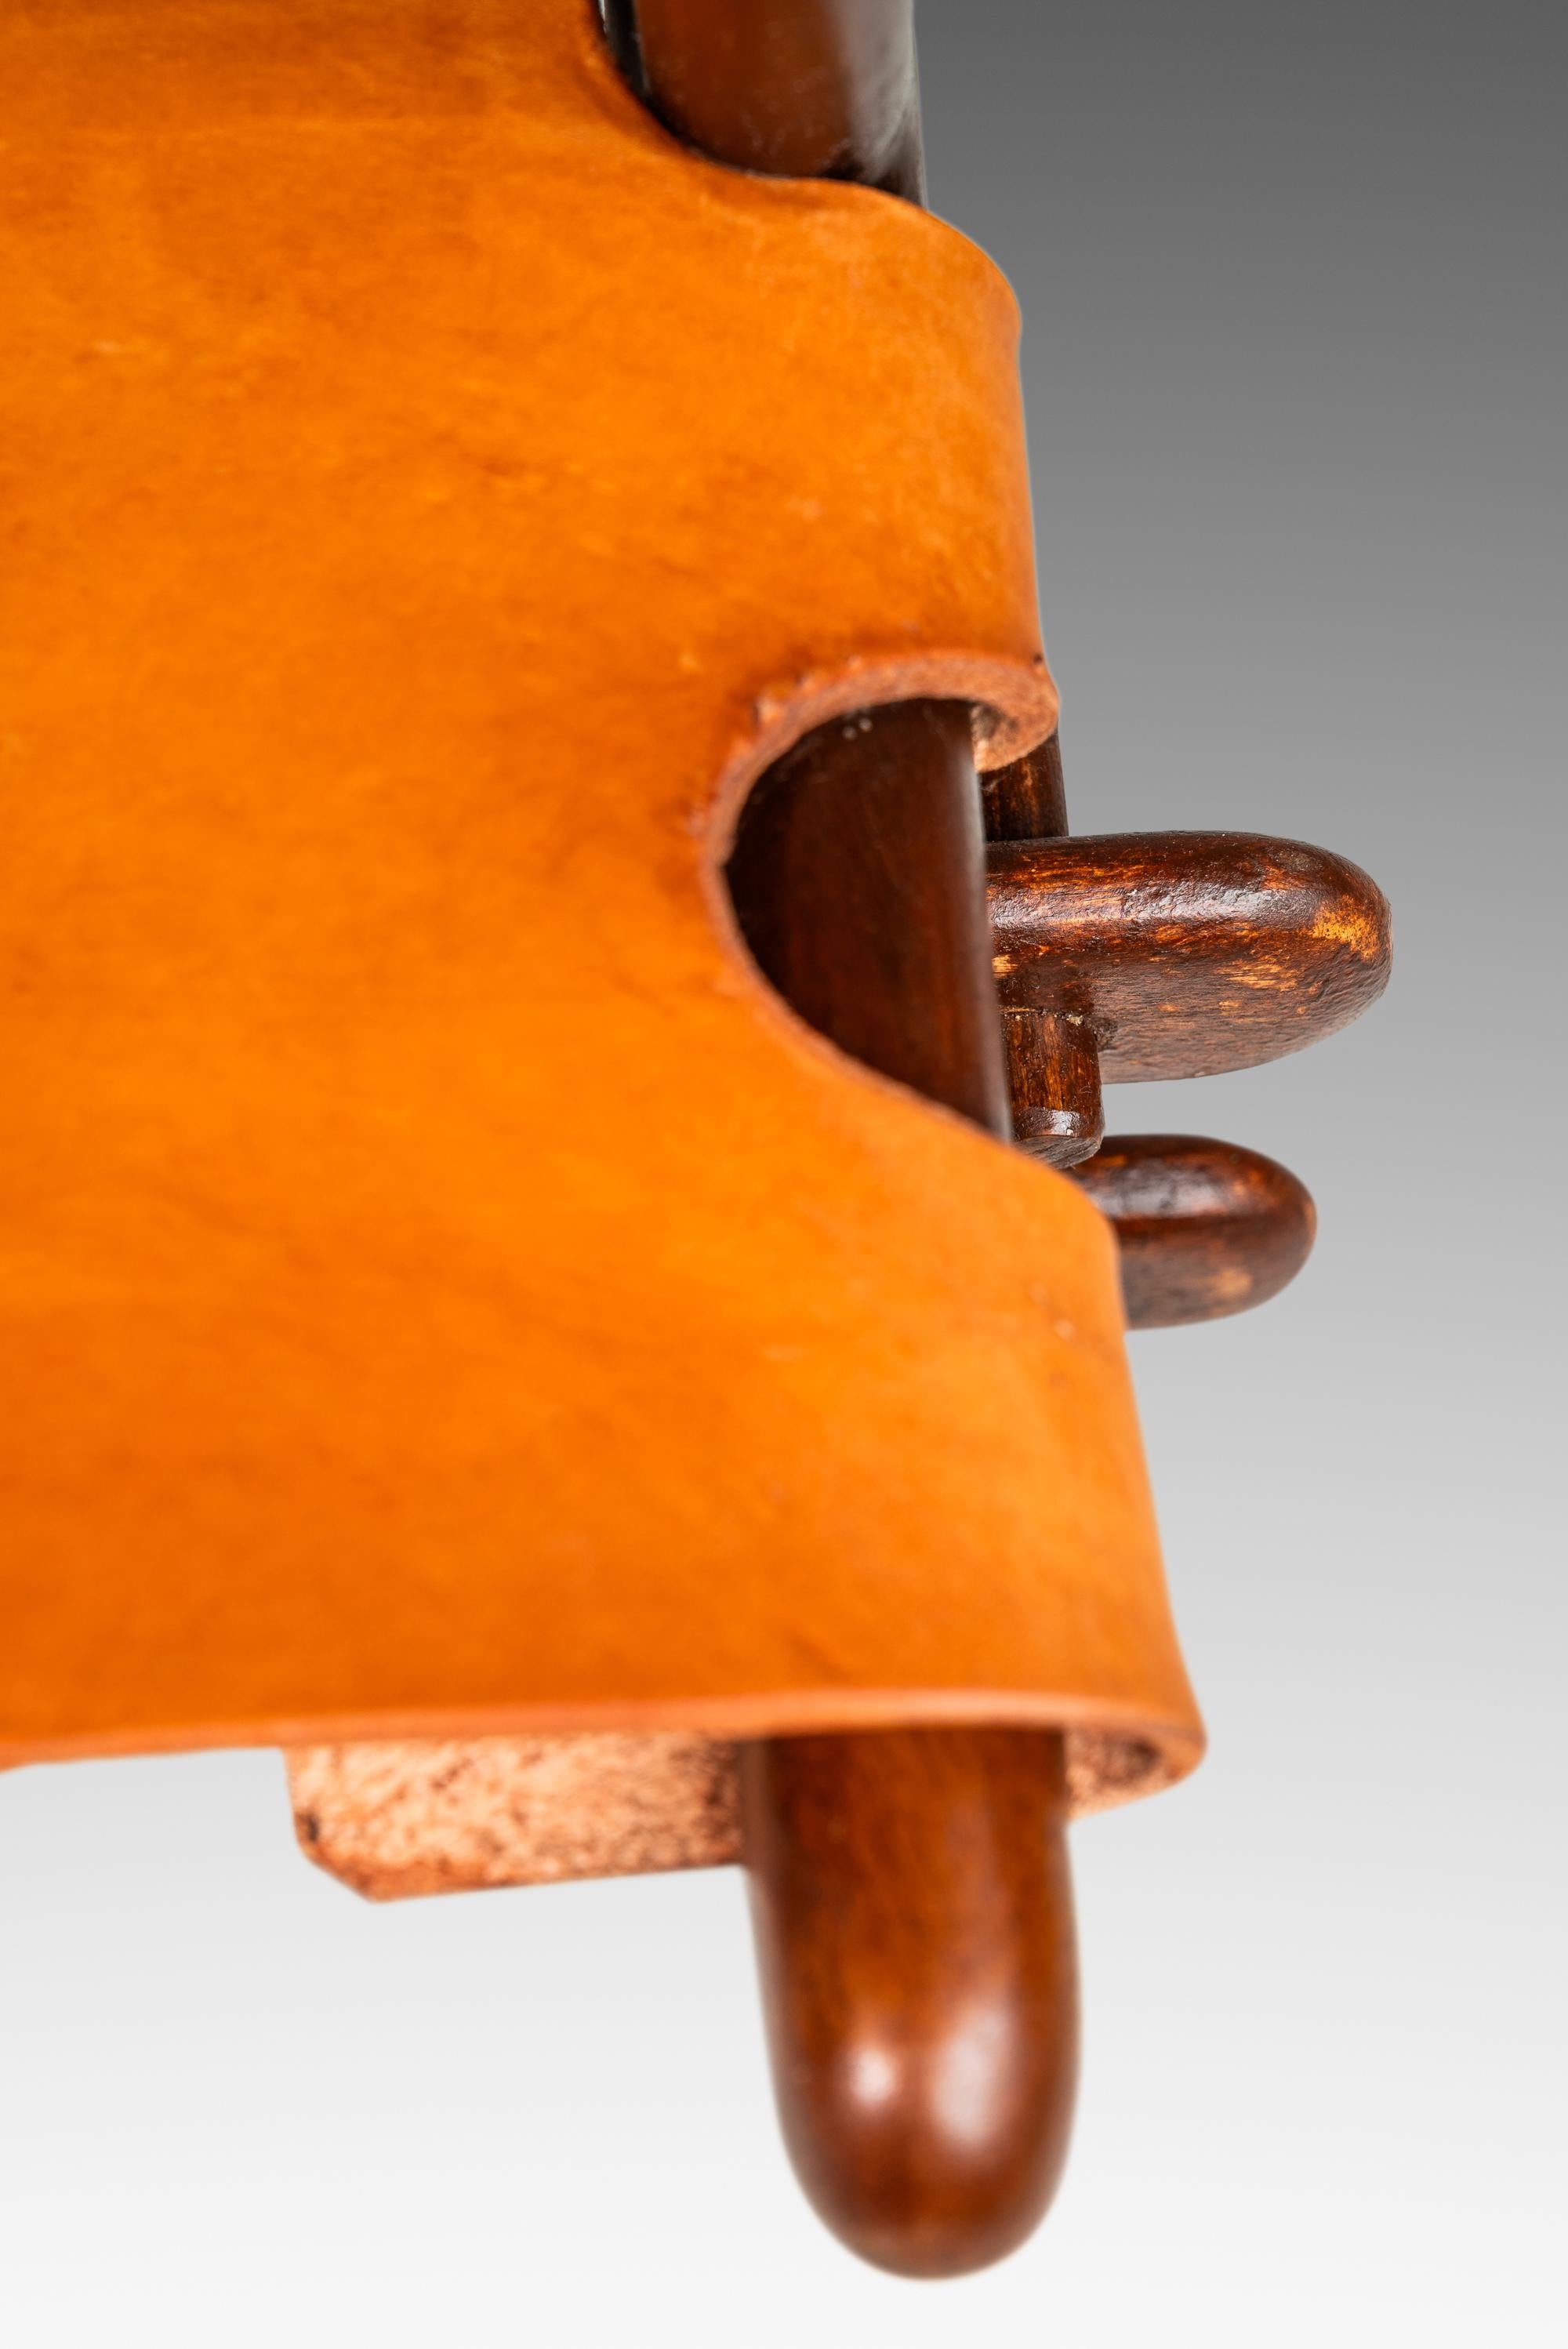 Tooled Leather Sling Safari / Lounge Chair by Angel Pazmino, Ecuador, c. 1960s  For Sale 4